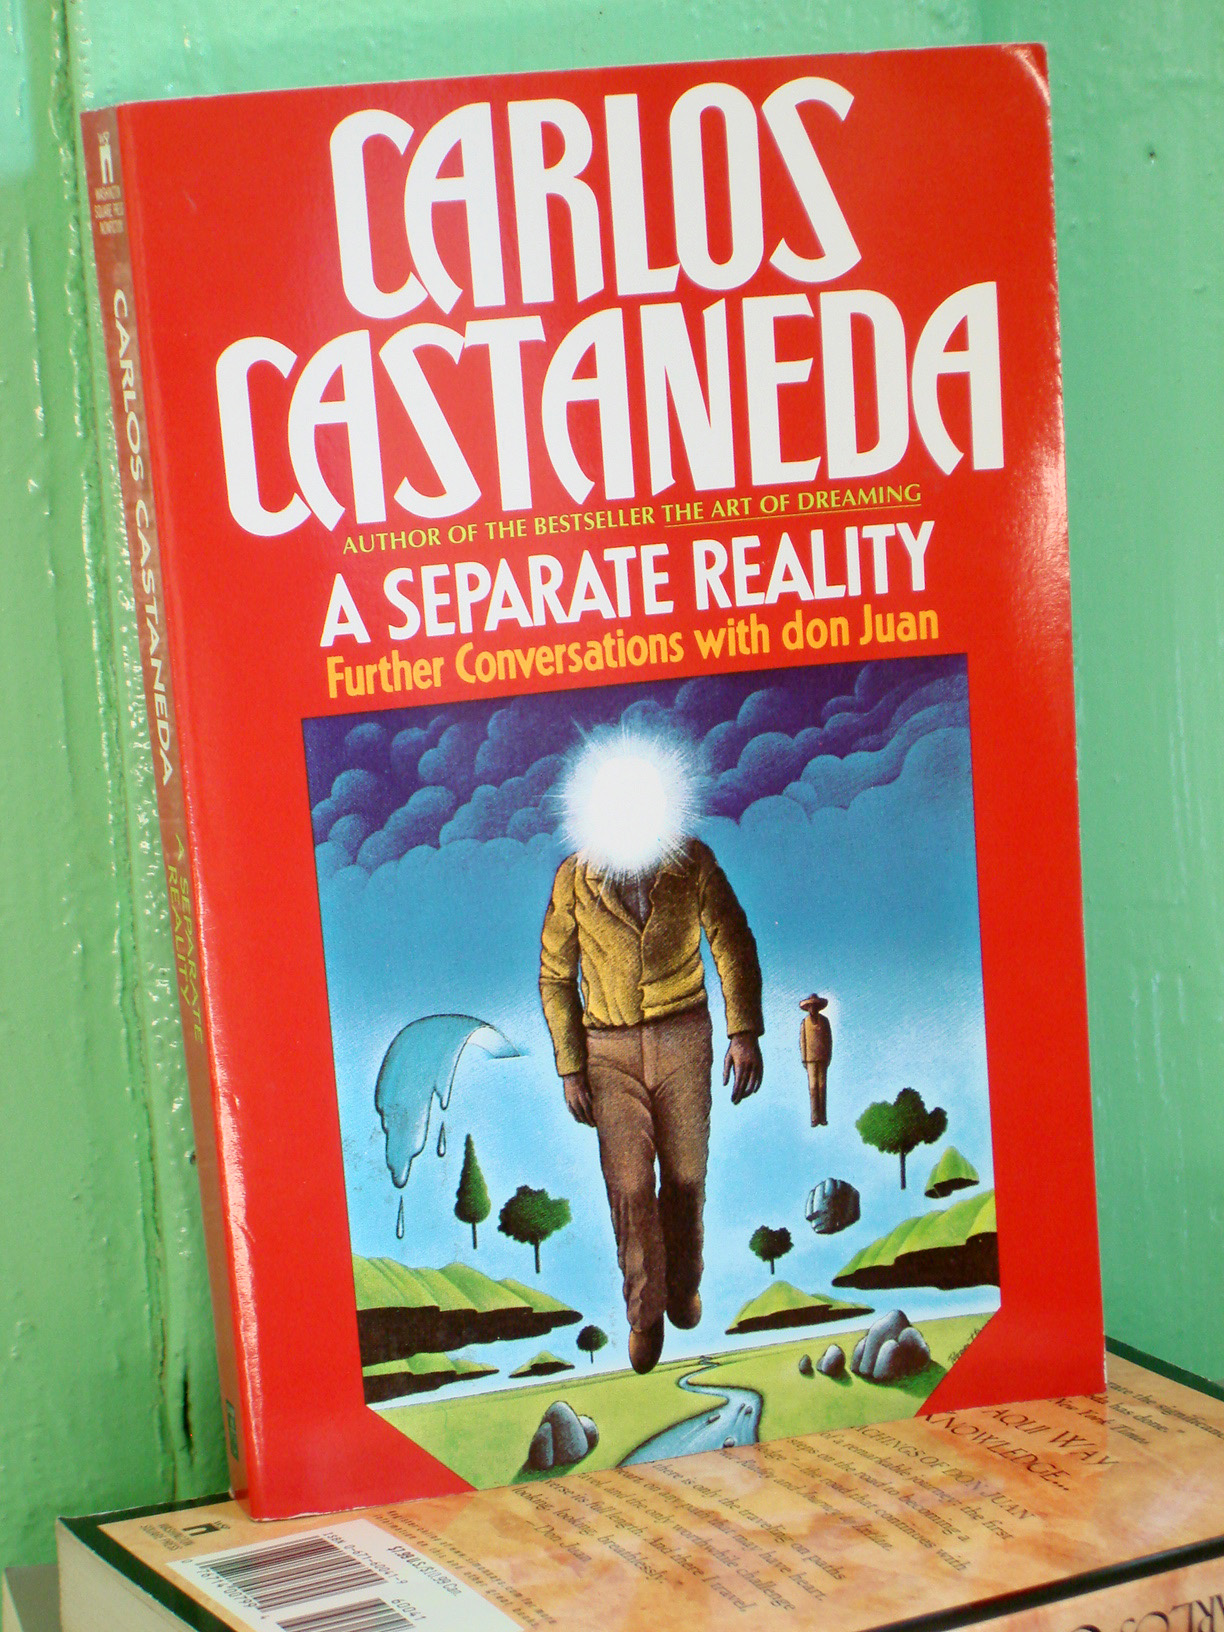 A separate reality (***OUT of STOCK***)